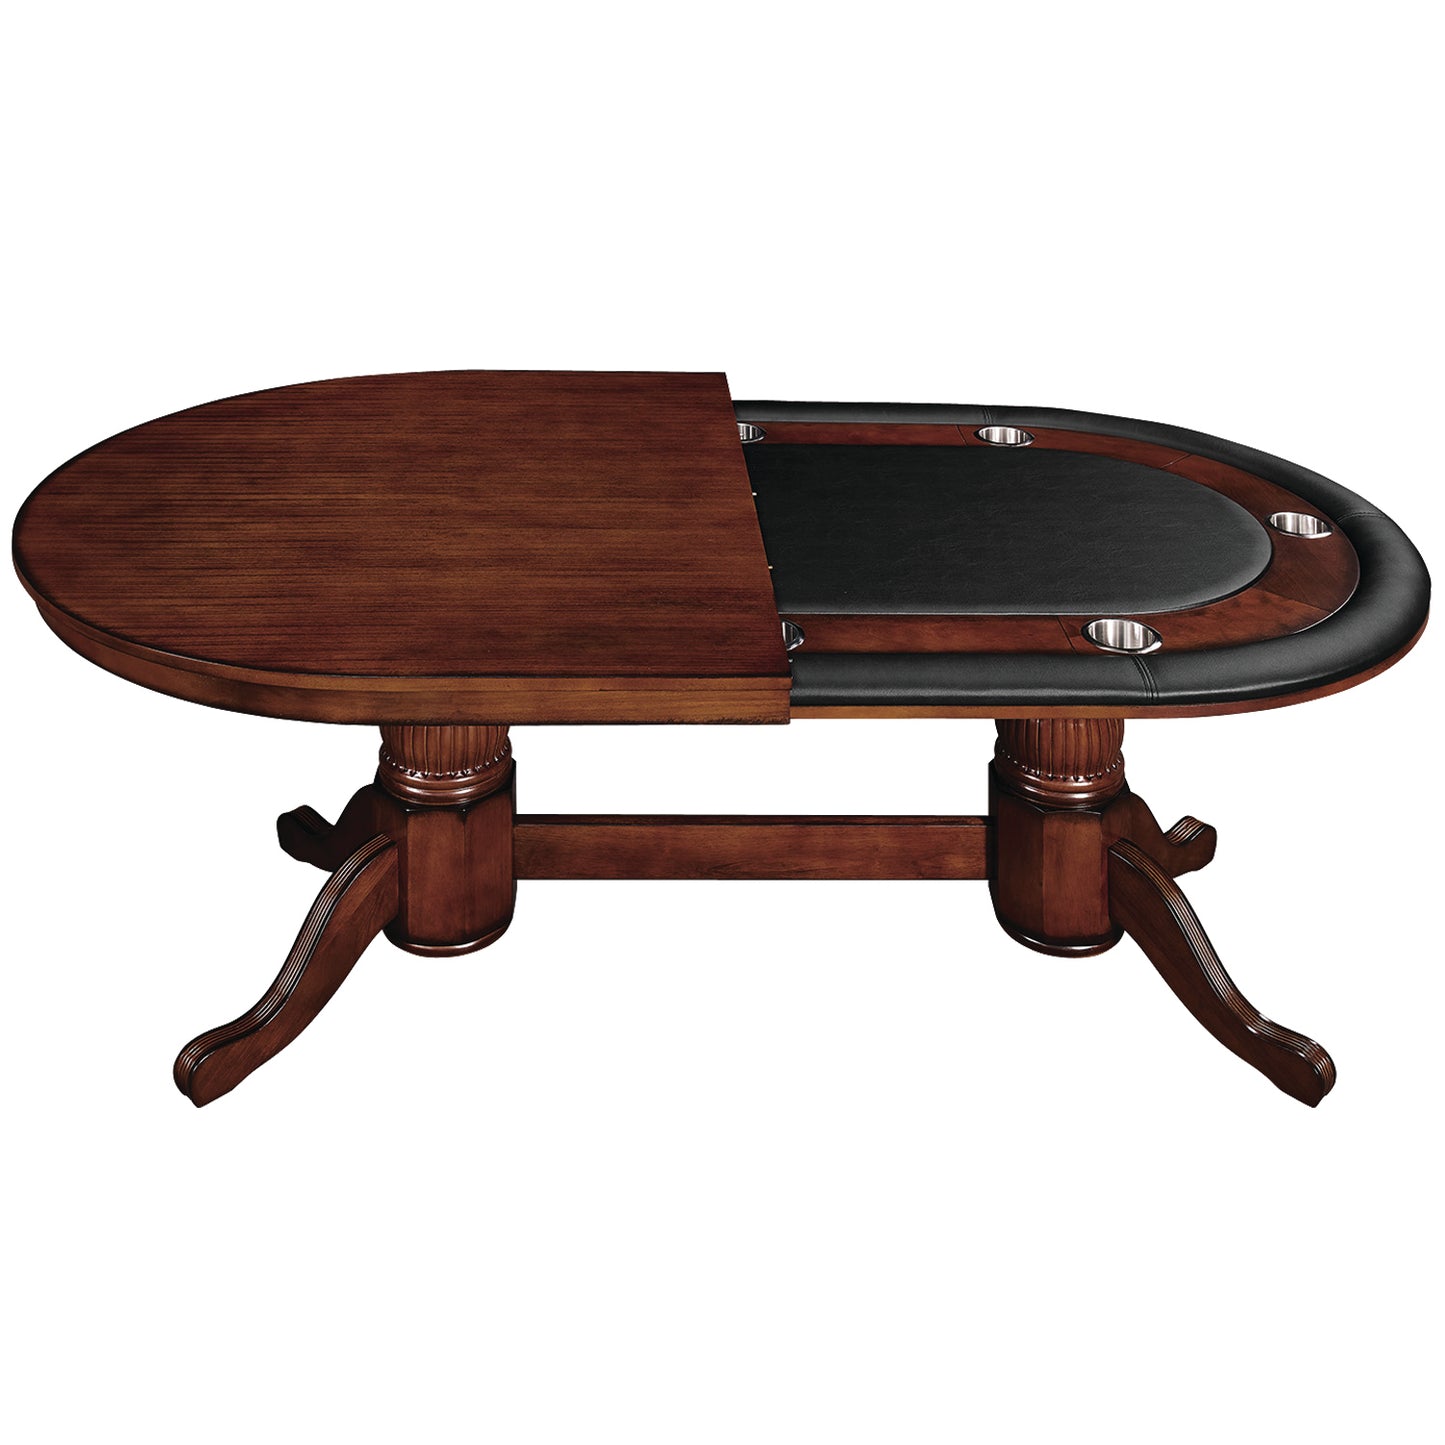 84 inch solid wood poker table with half the wooden dining top in a chestnut finish.